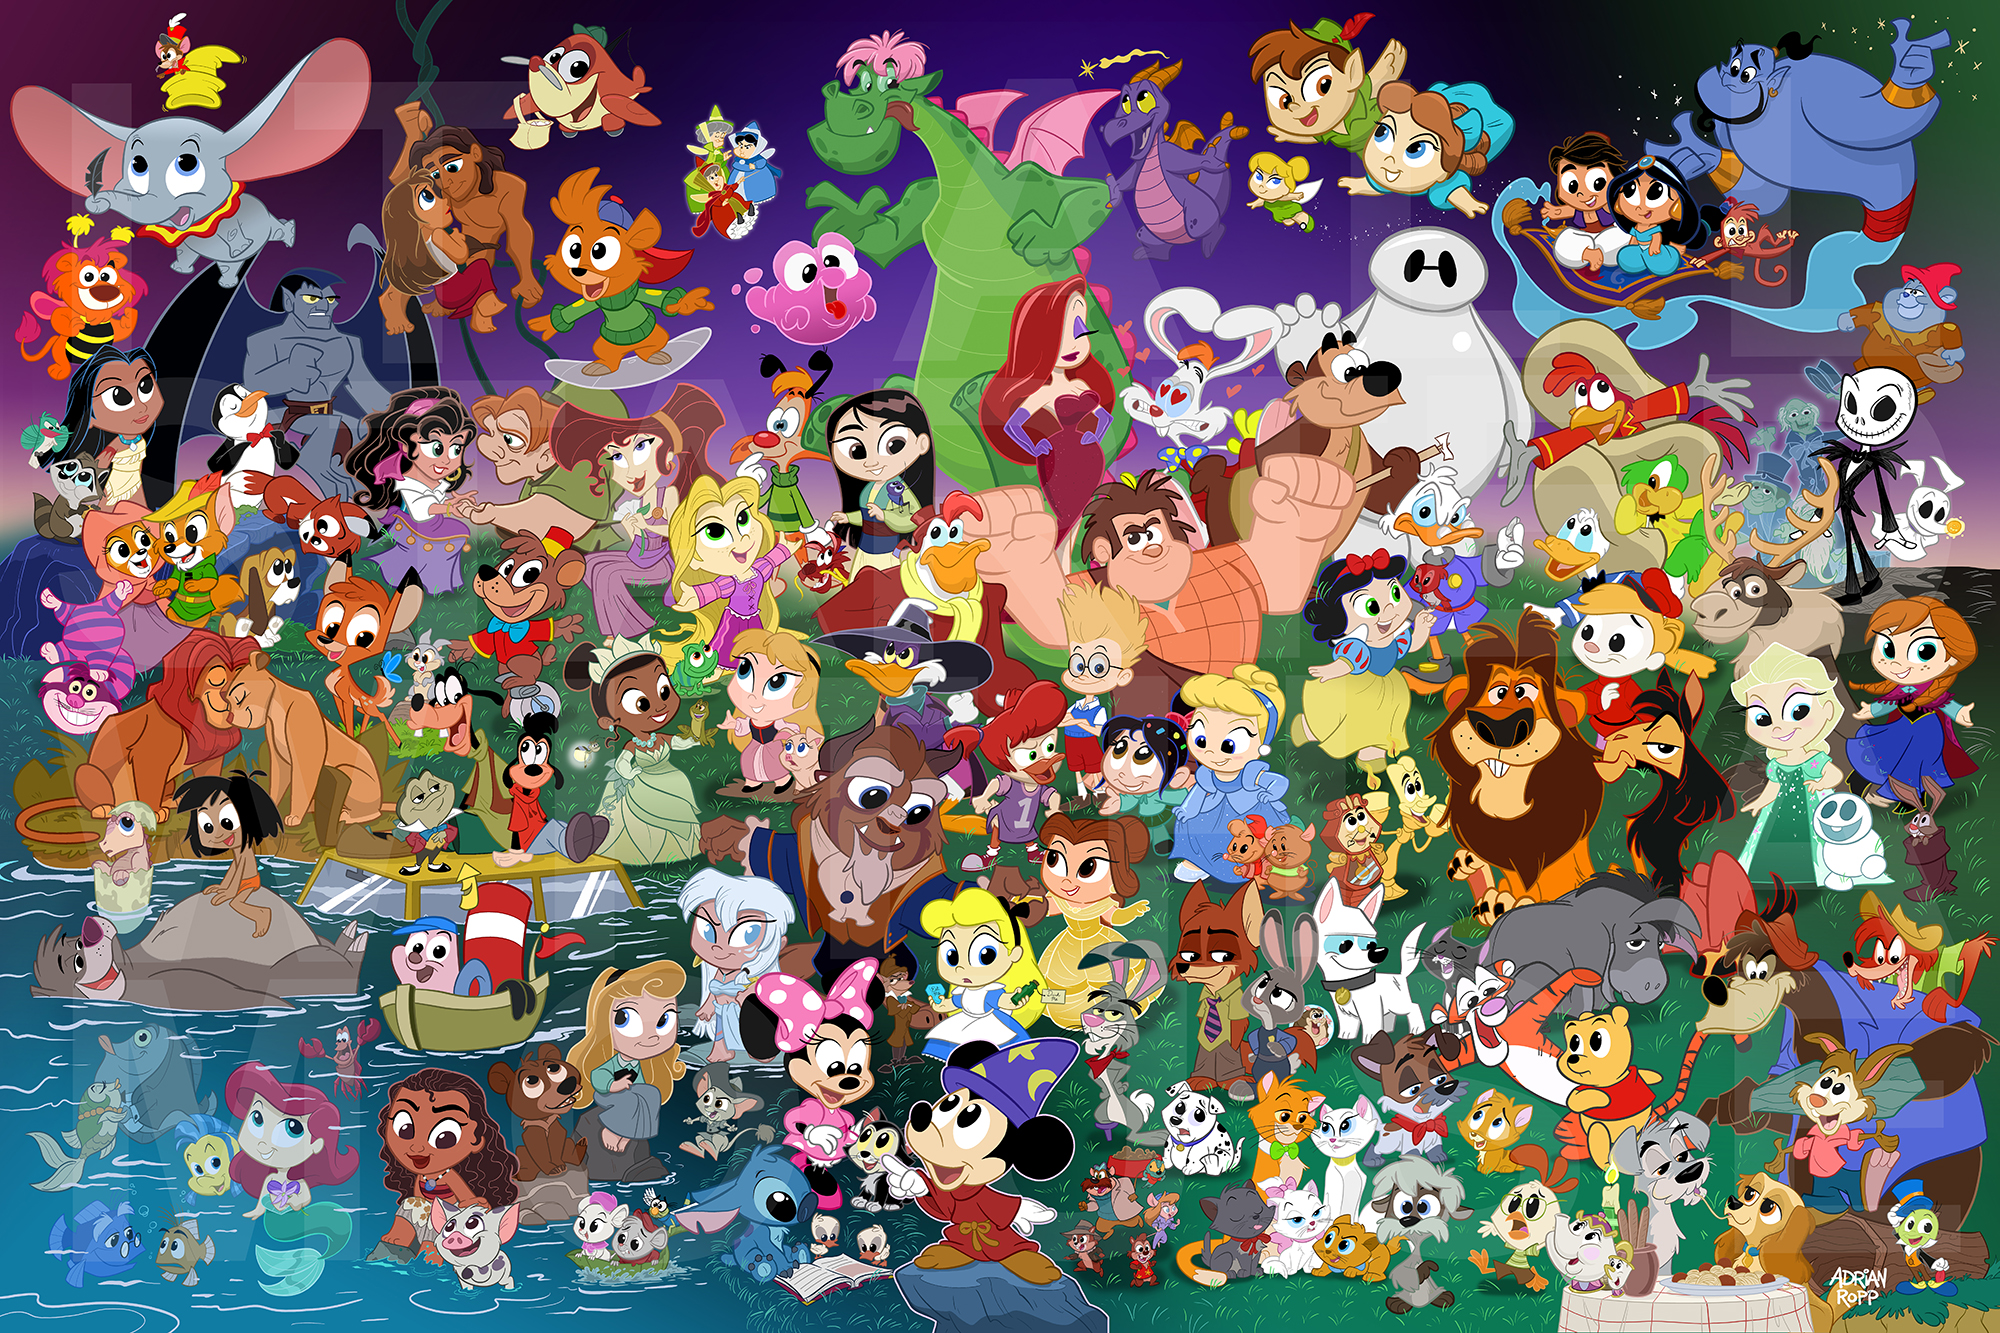 Every Disney Animated Movie - Plus Extras! by toonbaboon on DeviantArt